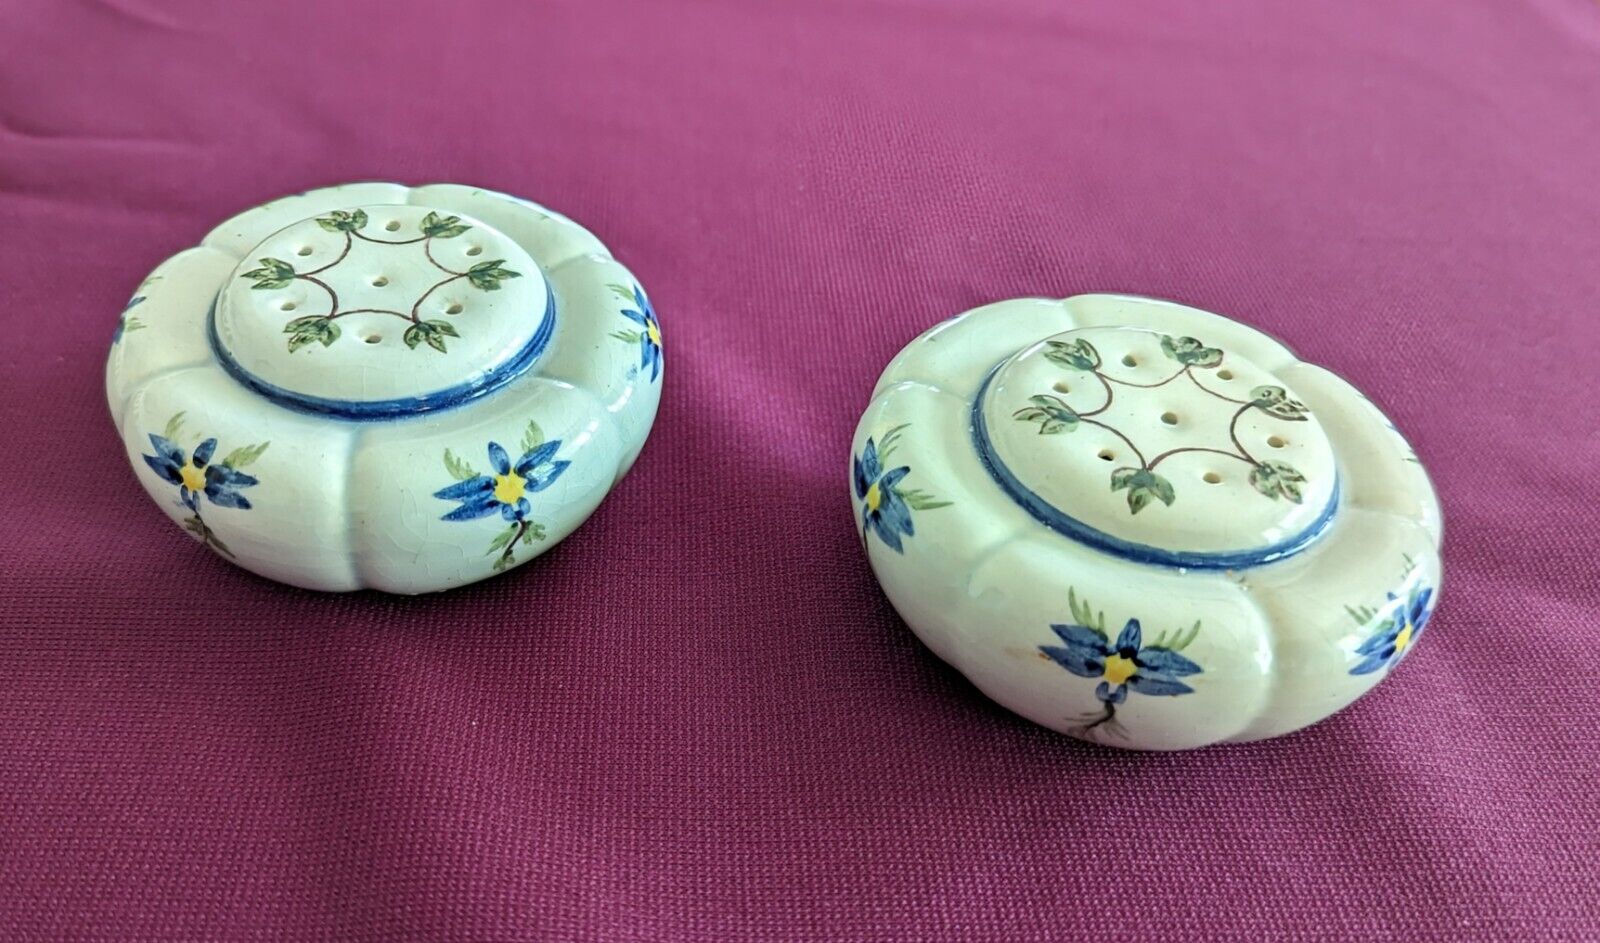  Vintage Carvalhinho Pottery Salt & Pepper Shakers From Portugal Hand Painted 